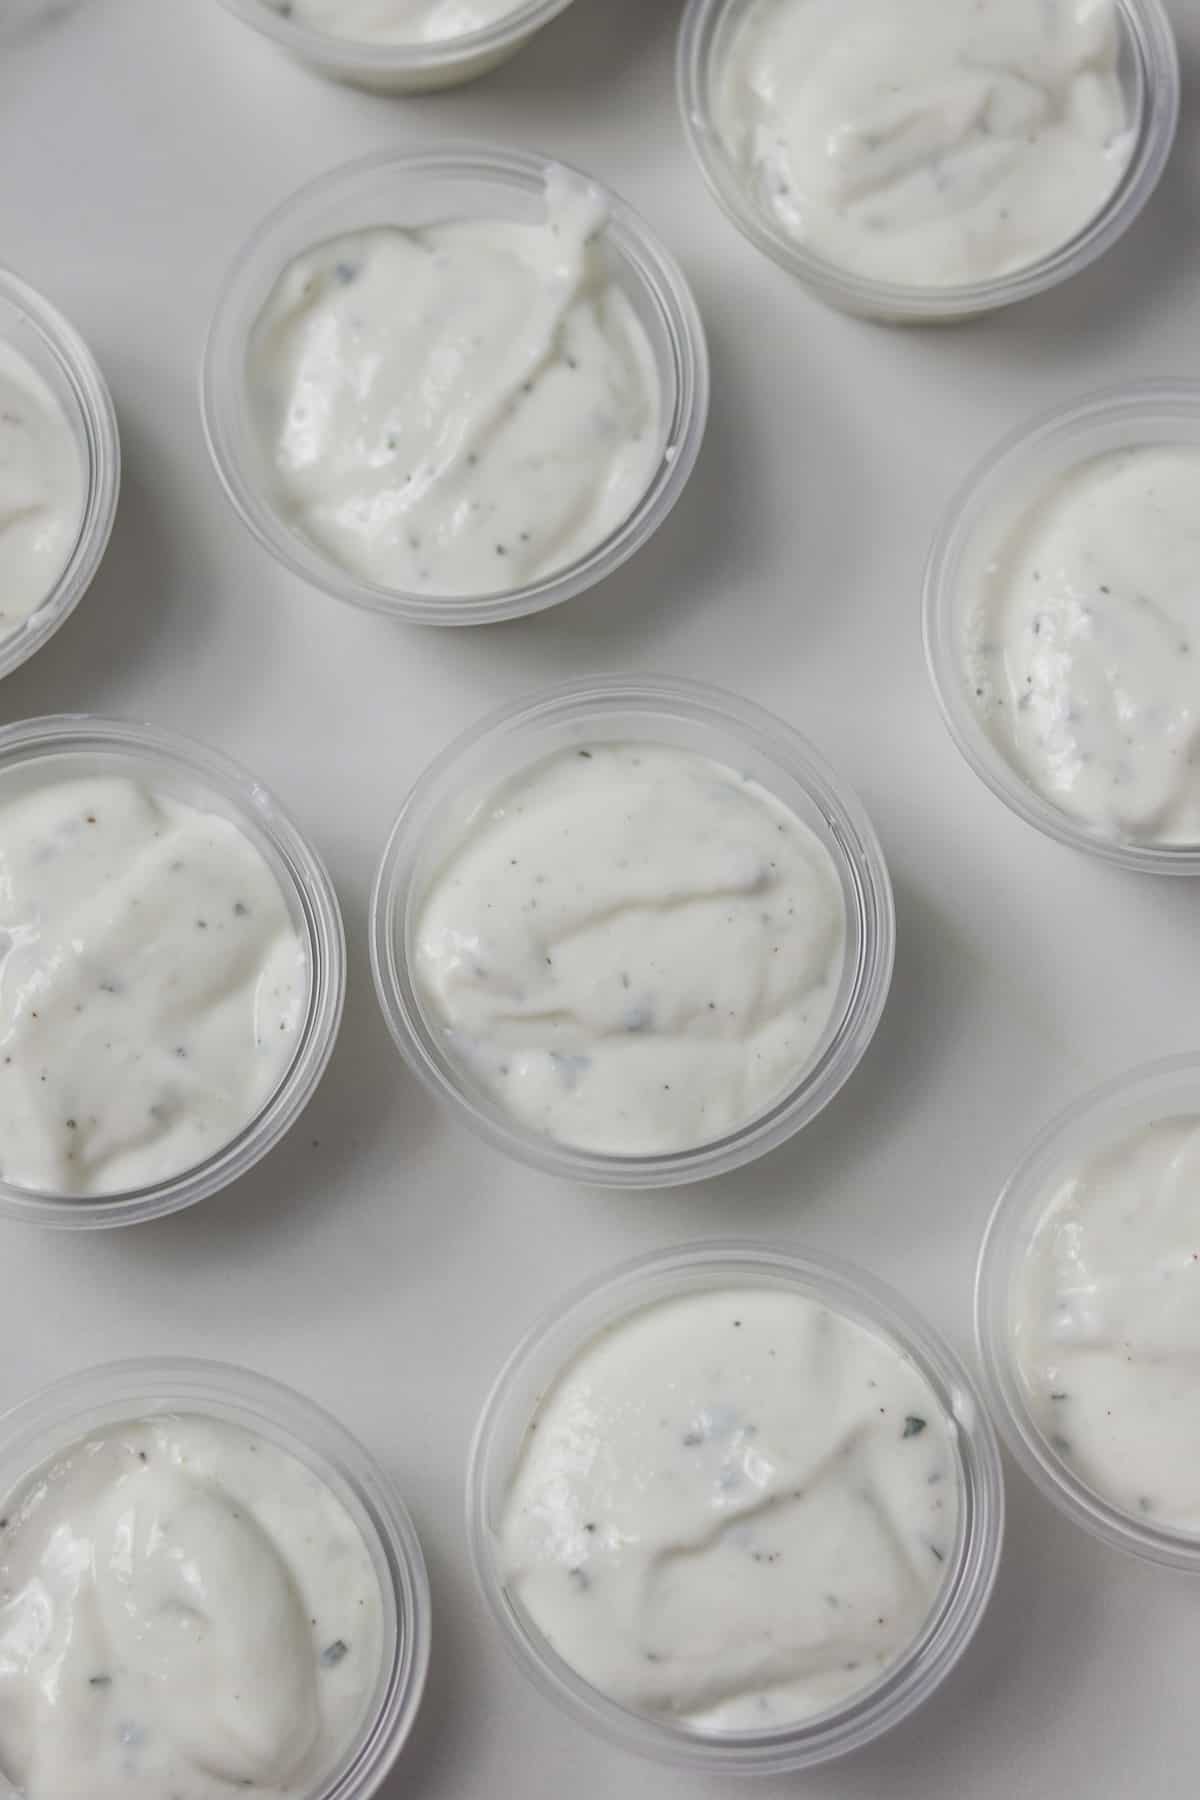 ranch dressing in individual plastic containers